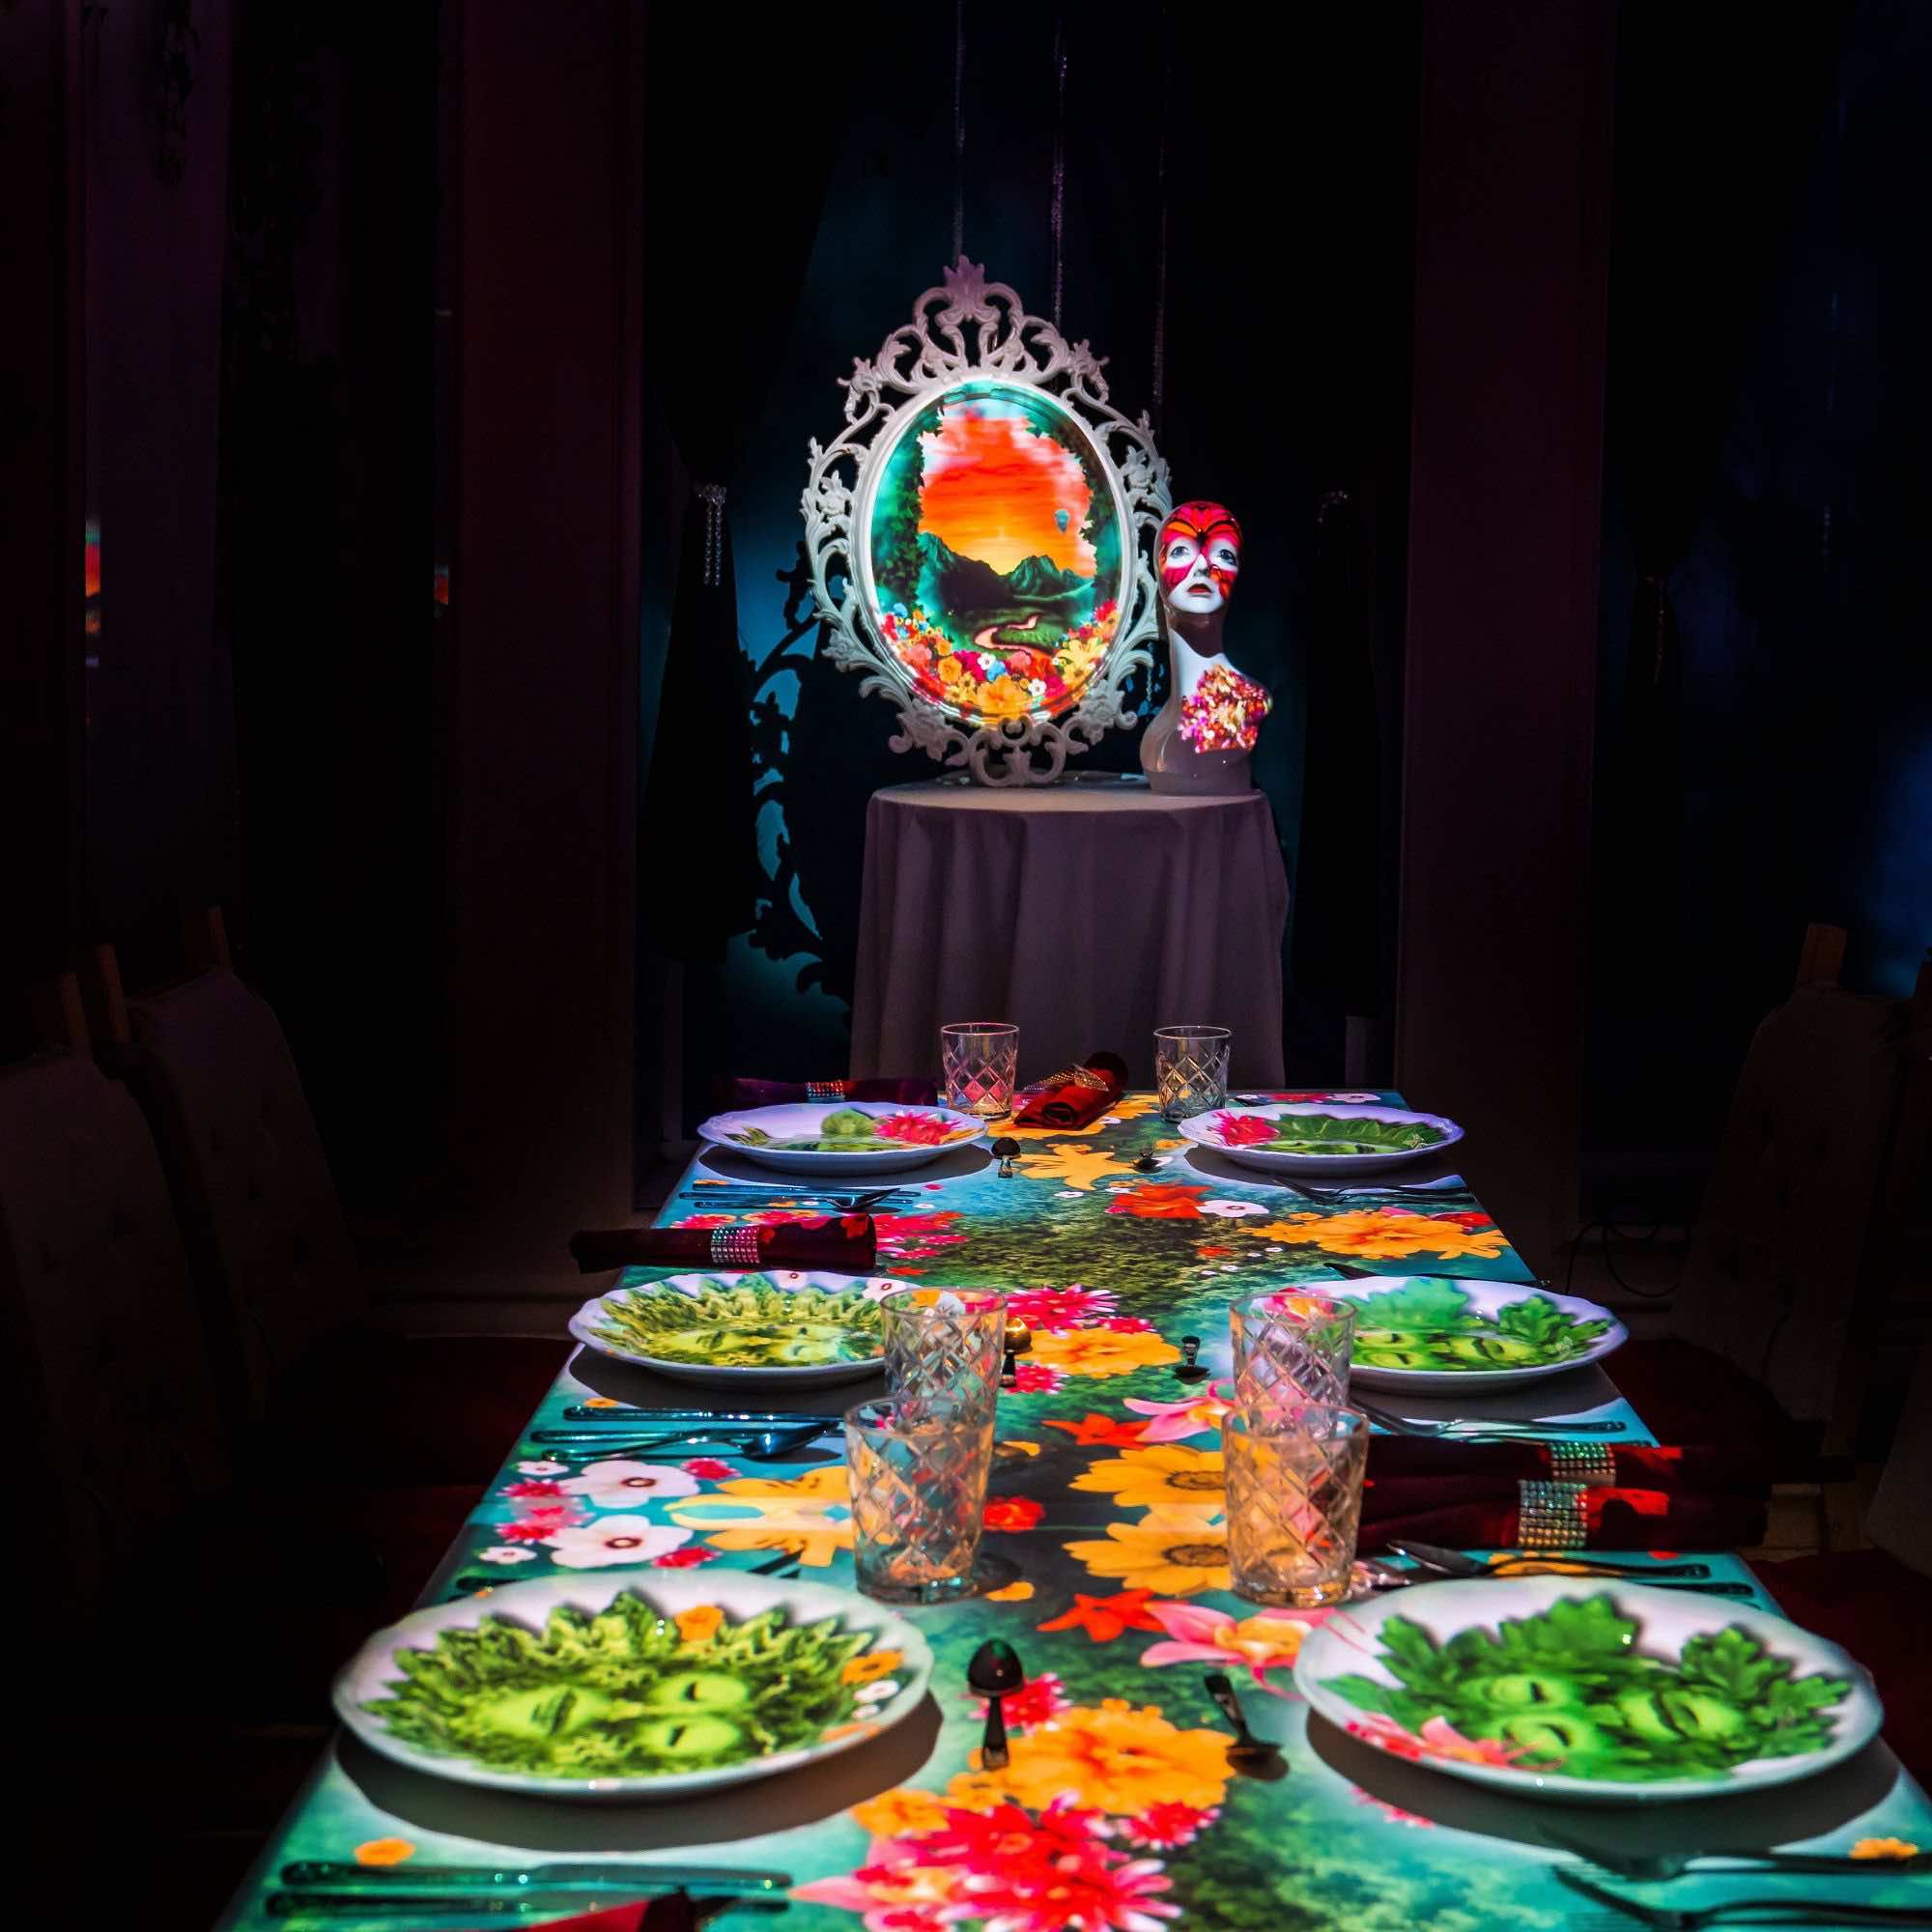 , Enchanted to meet you: Luce at InterContinental Singapore presents the immersive Banquet of Hoshena